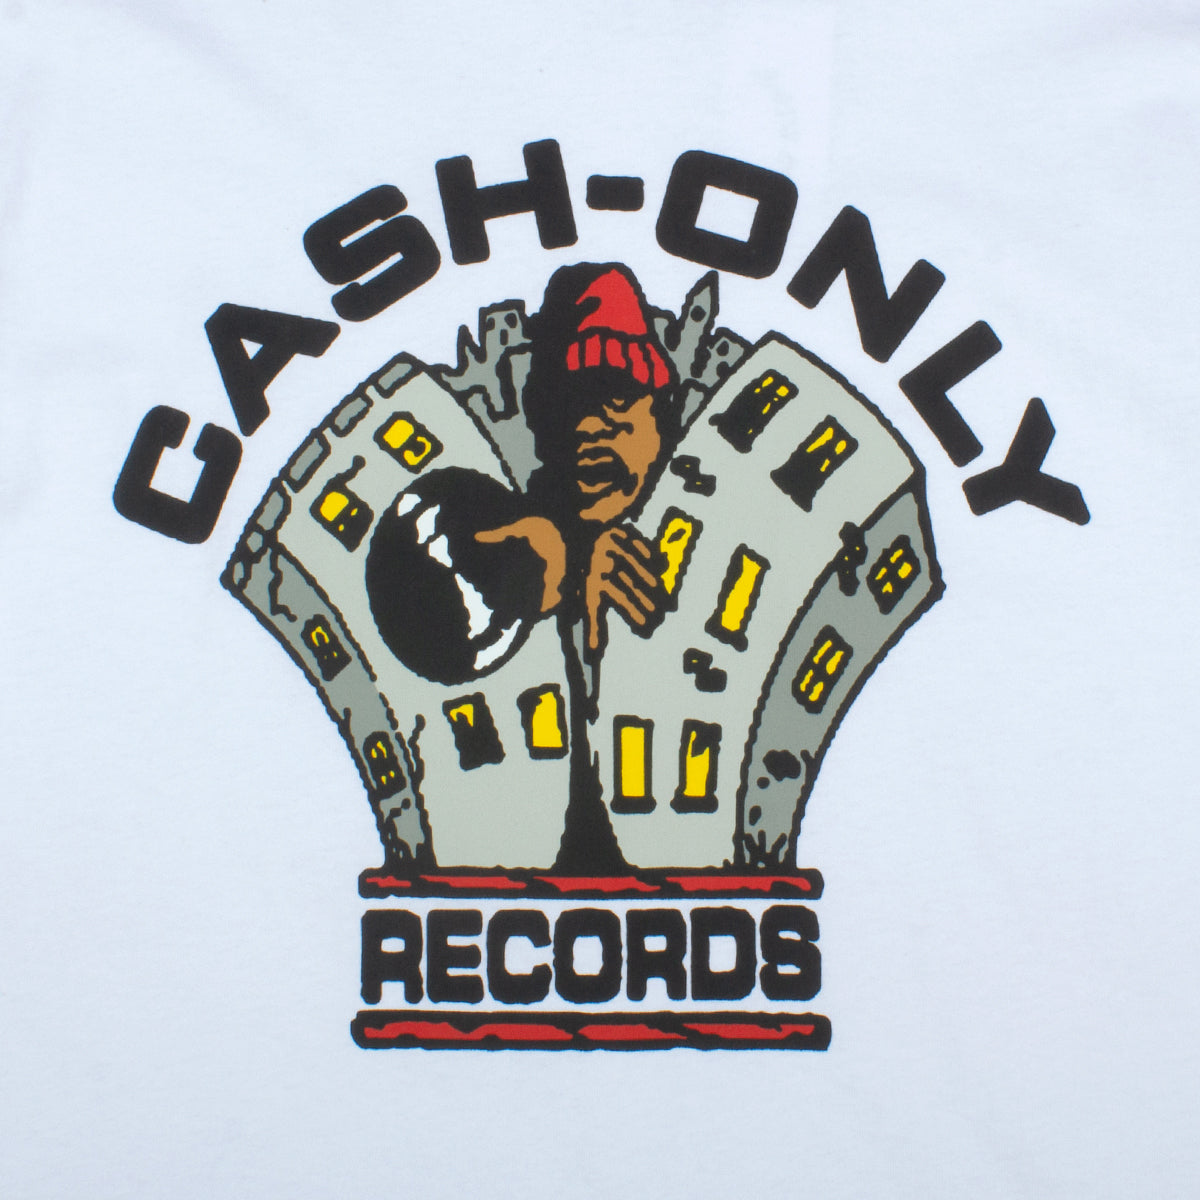 Cash Only Records T-Shirt